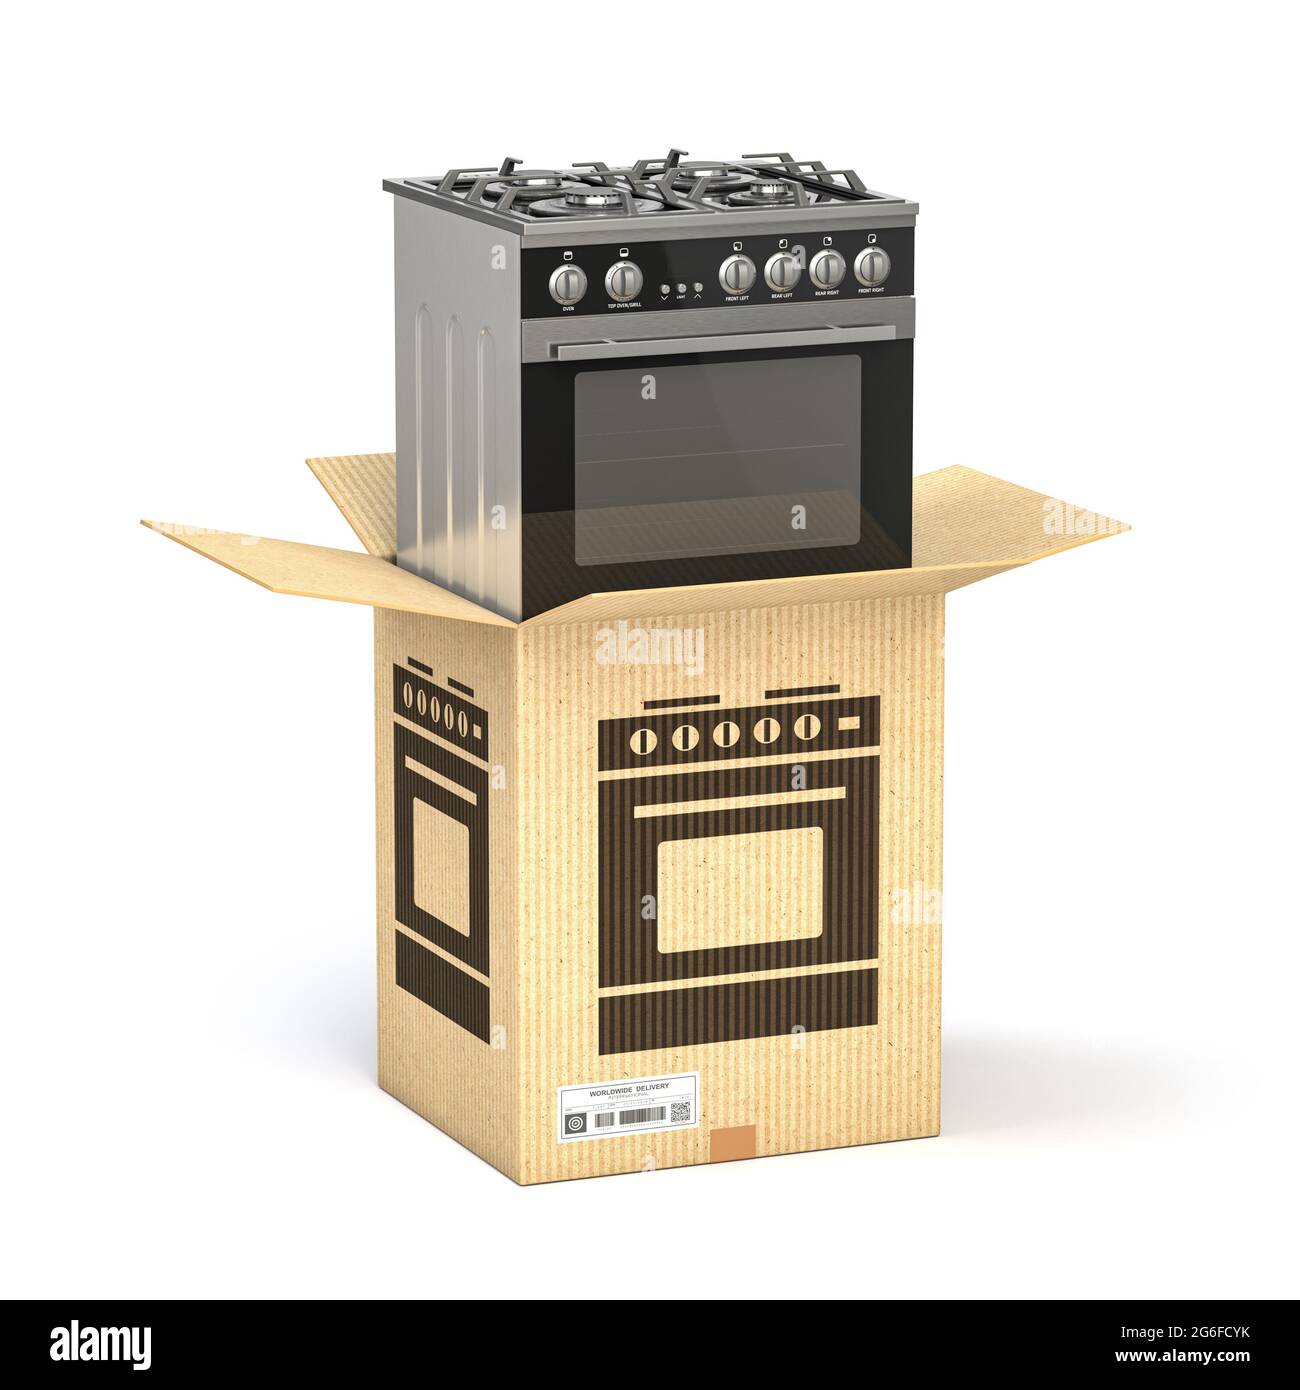 Gas cooker in cardboard box isolated on white. Household kitchen appliances purchasing online concept. 3d illustration. Stock Photo